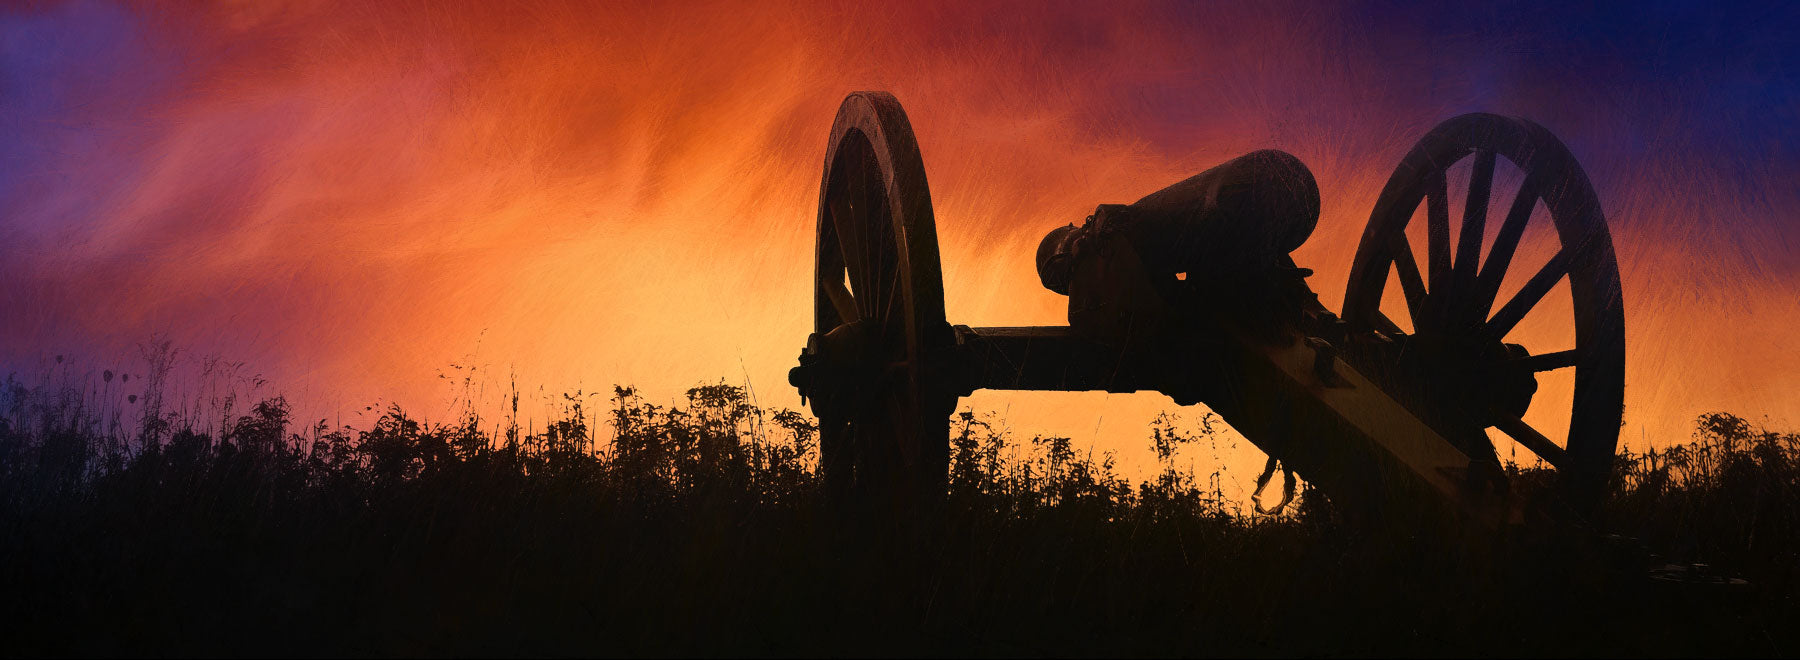 New Releases - Cannon silhouette against sunset.